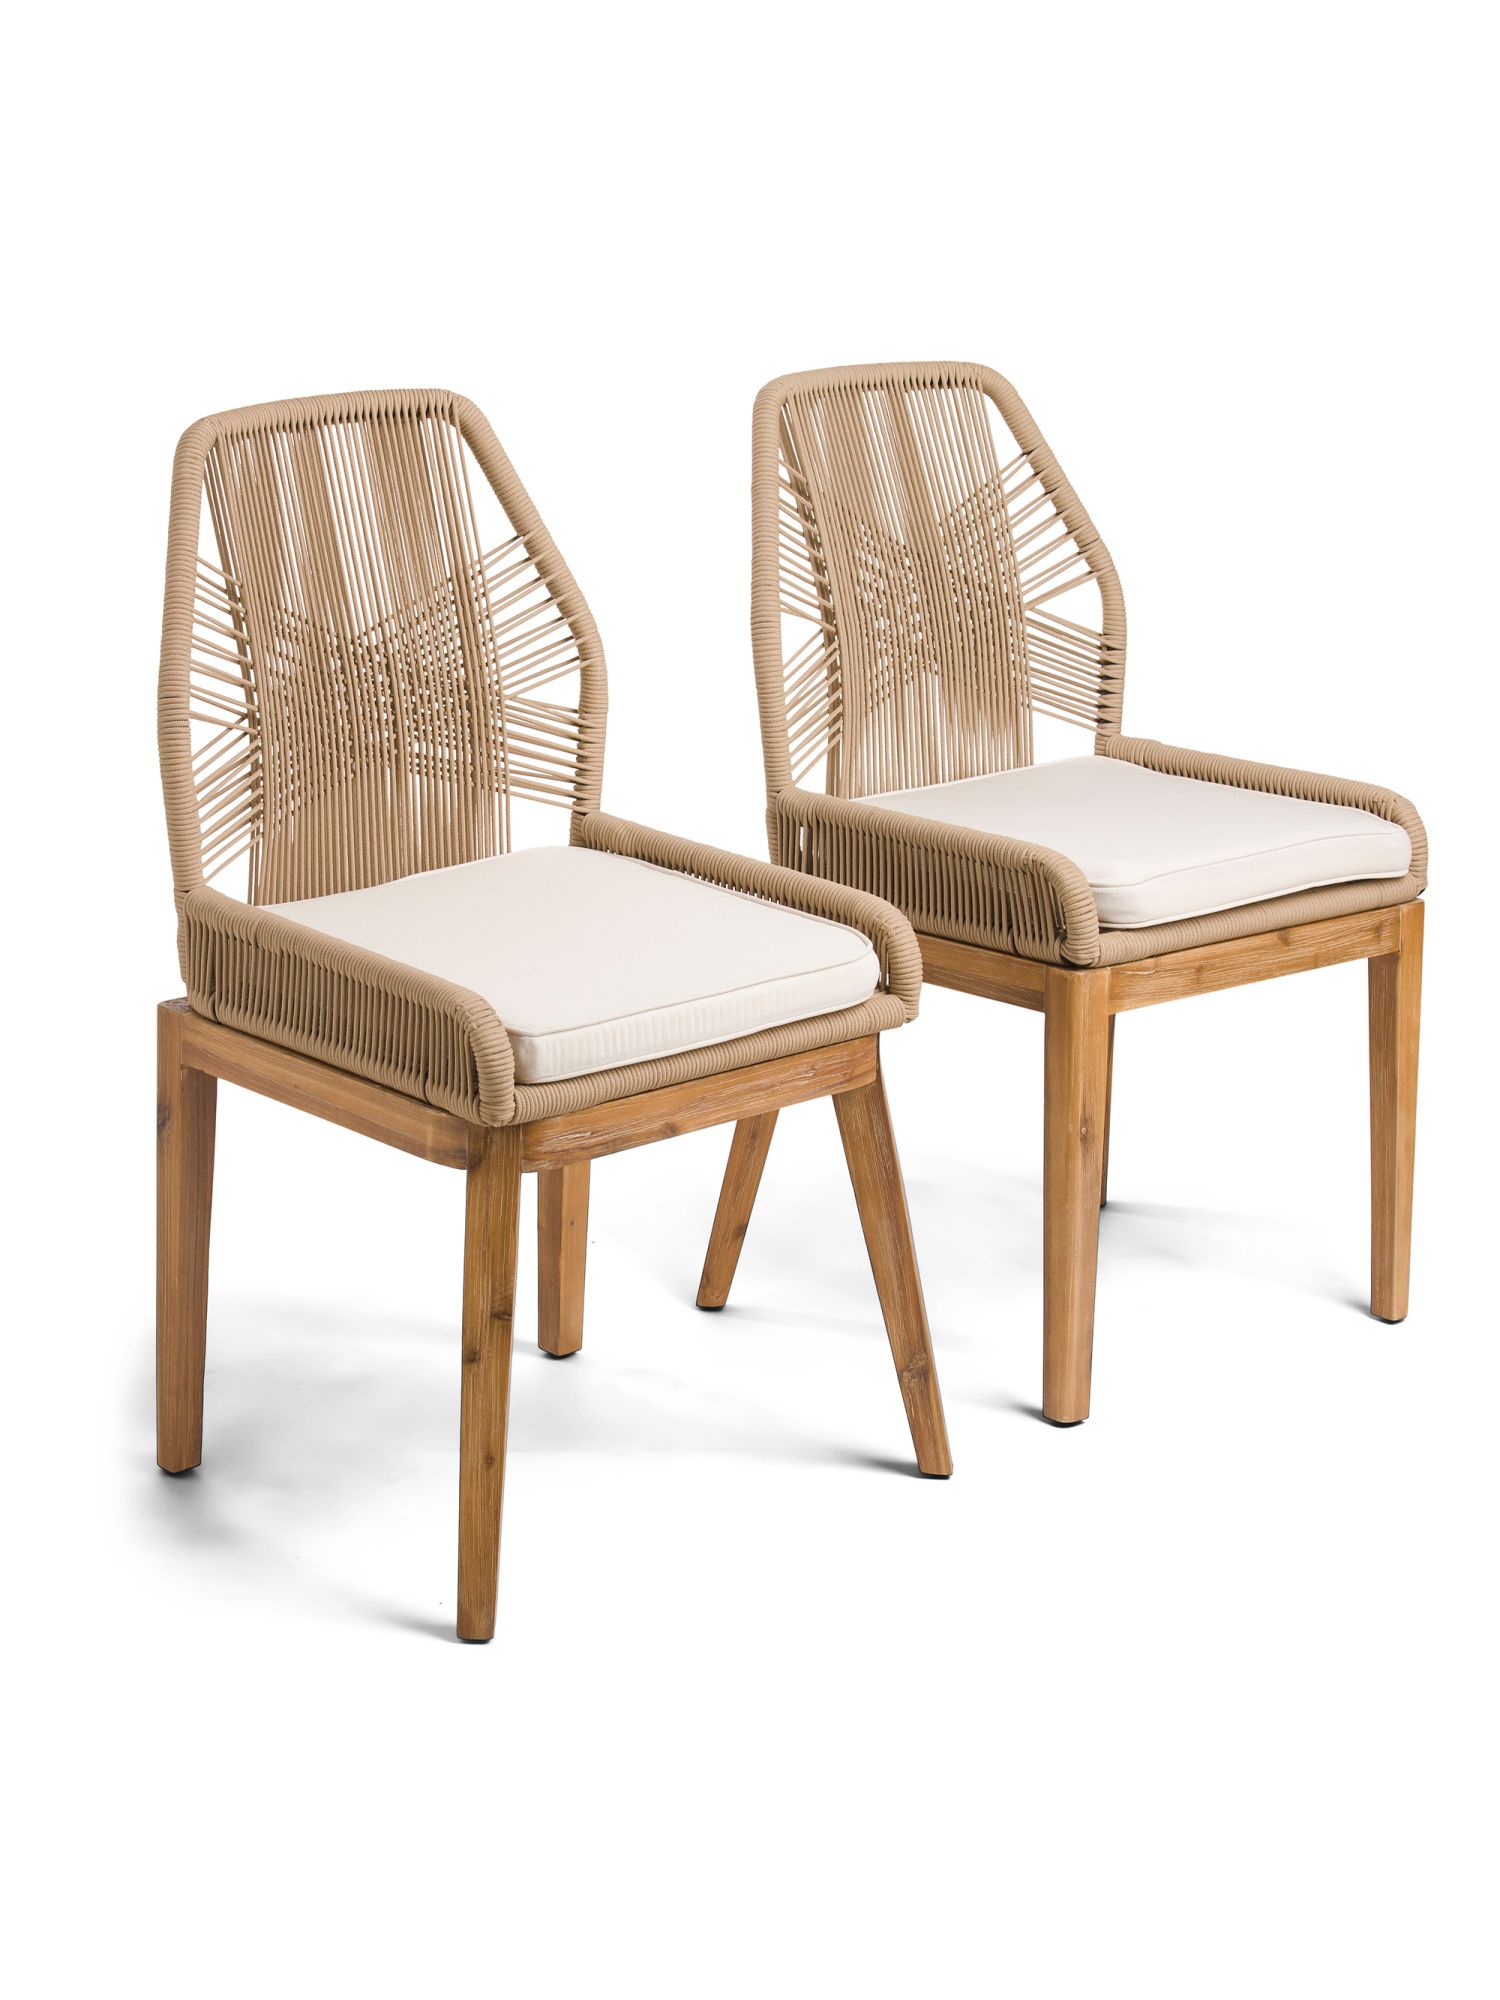 Set Of 2 Rope Crossweave Side Chairs With Cushions | TJ Maxx